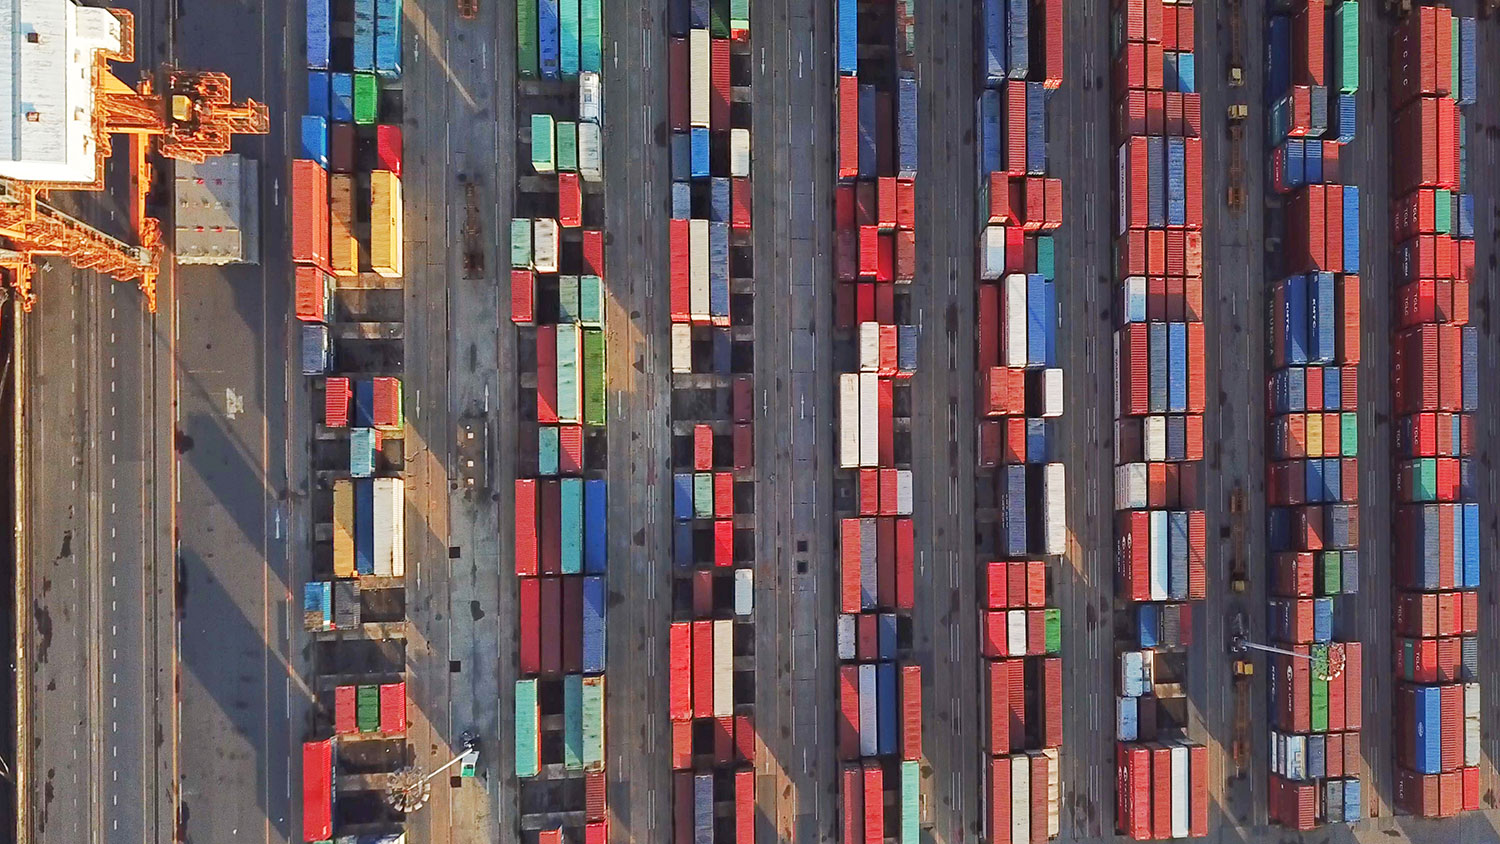 Containers at port